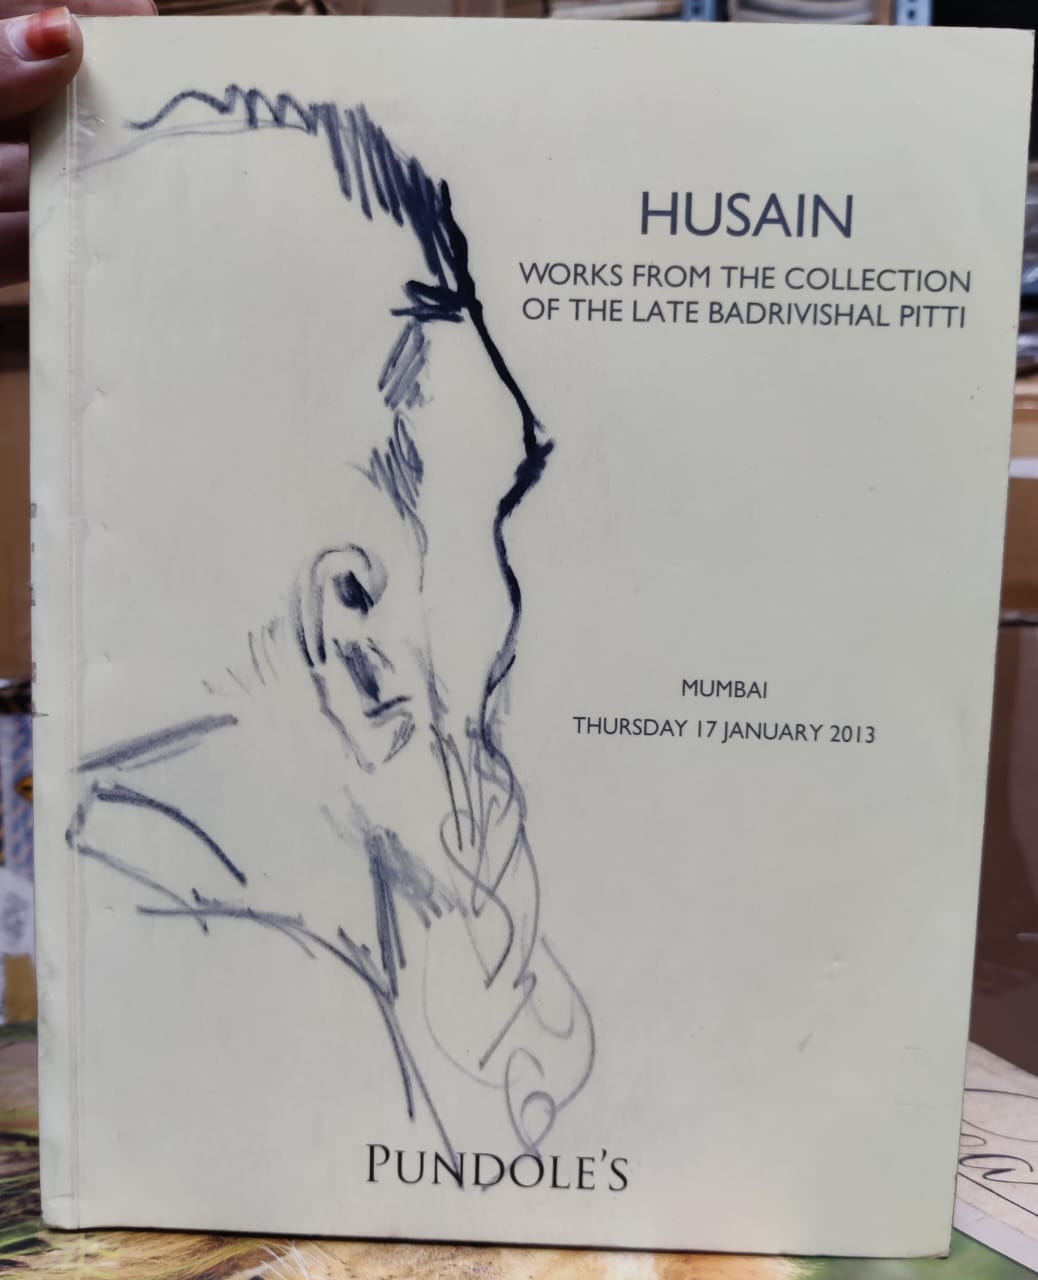 HUSSAIN WORKS FROM THE COLLECTION OF THE LATE BADRIVISHAL PITTI  by PUNDOLE'S  MUMBAI THURSAY 17 JANUARY 2013